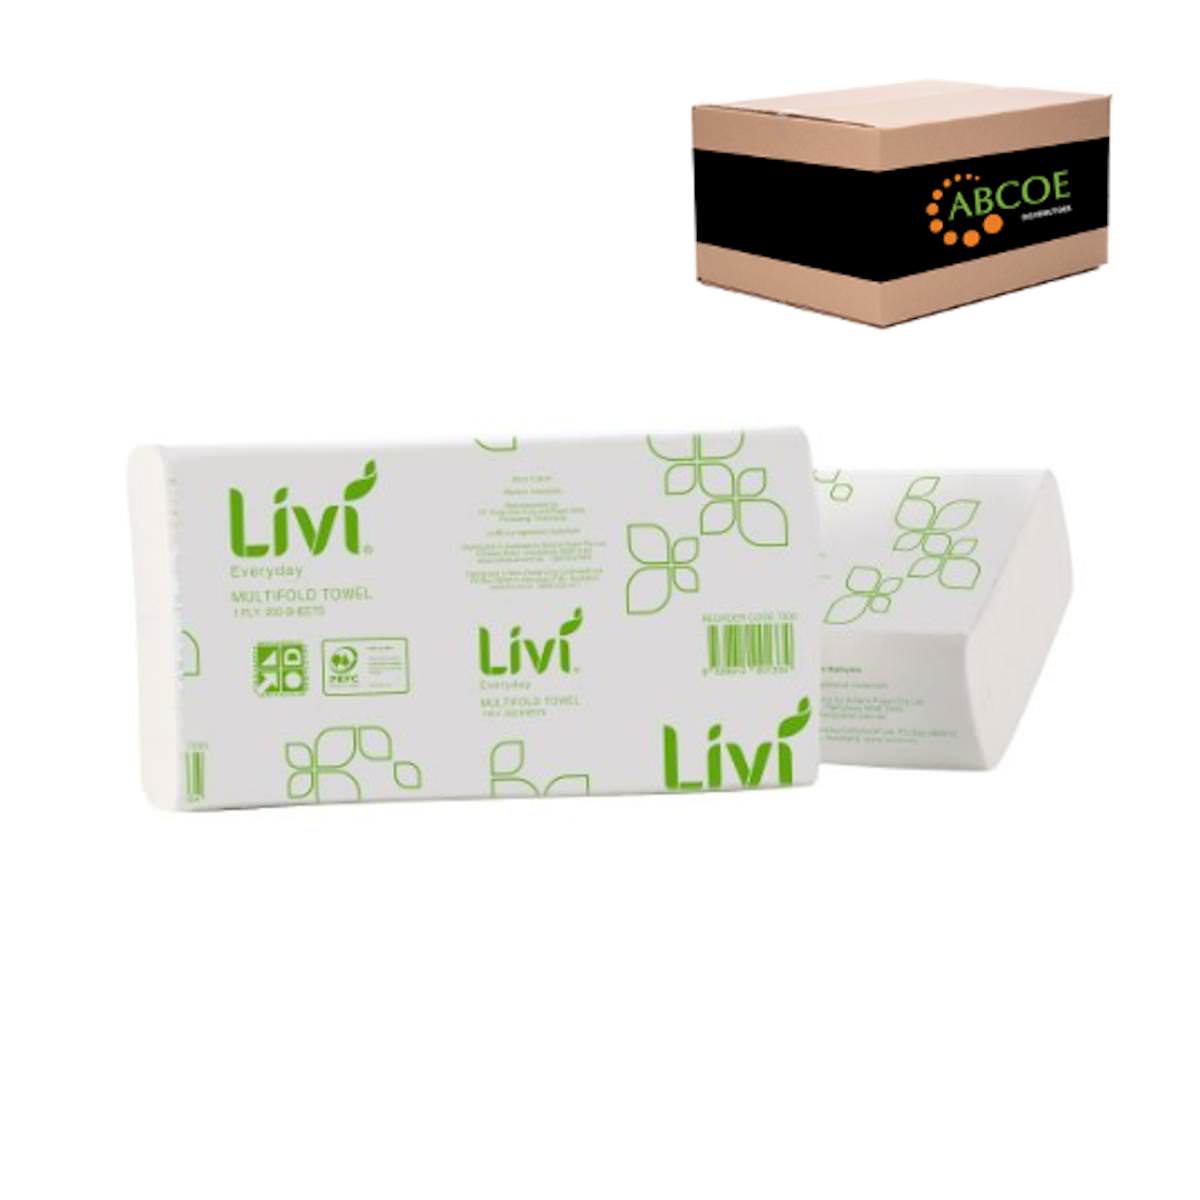 Livi Hand Towel Everyday Multifold 1 Ply 33-CT7200L  (Carton of 20 Packs of 200 - TOTAL 7200)